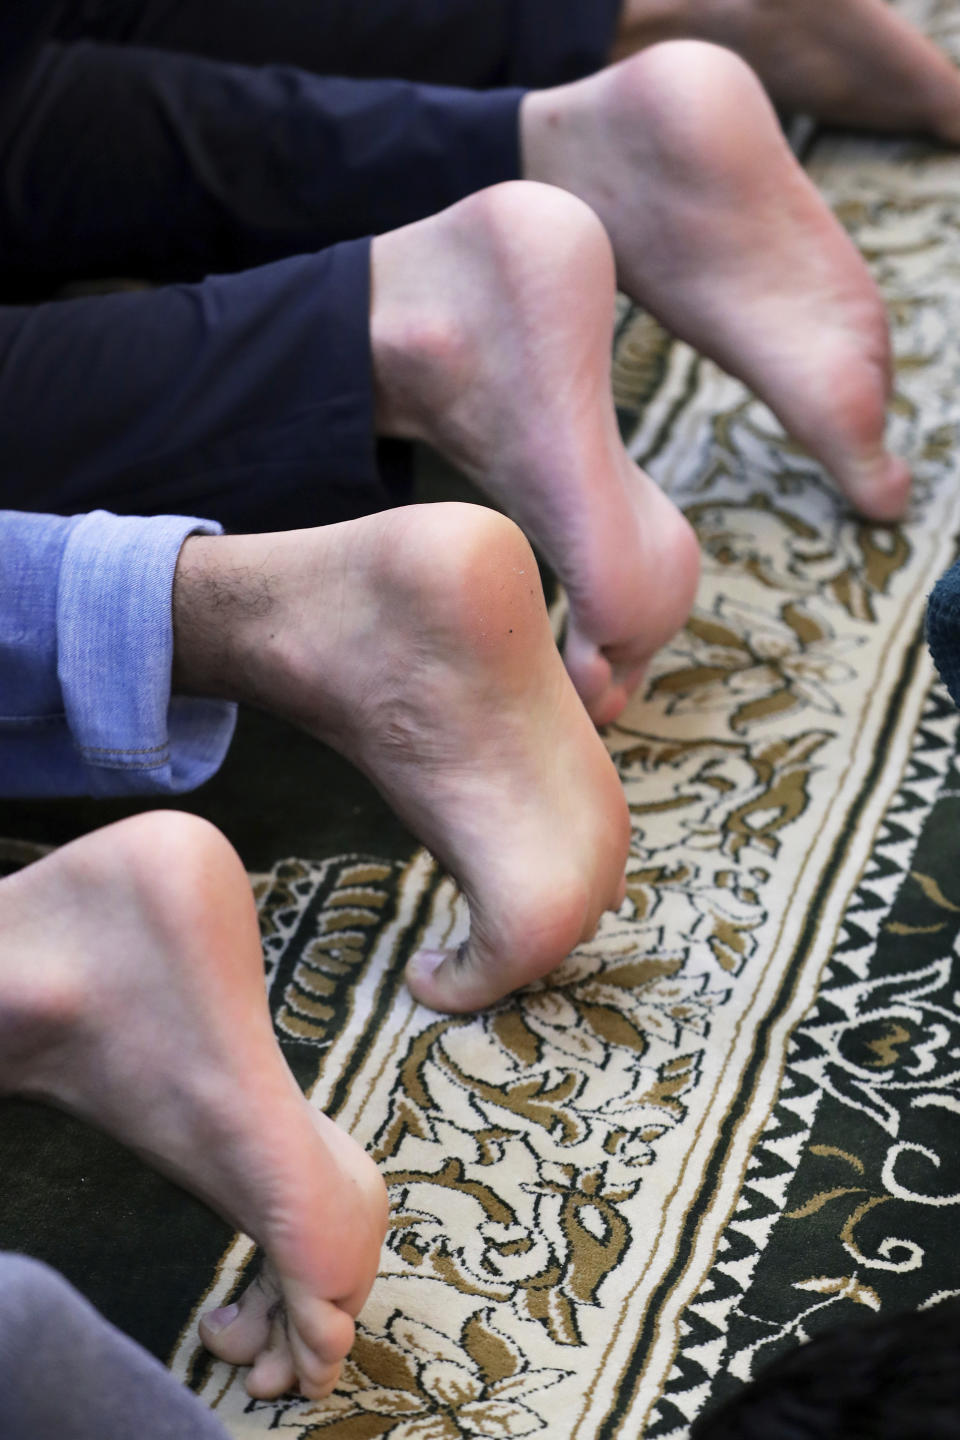 Brothers Abdul Wasi Safi, left, and , right, pray barefoot during Friday prayers at the Al-Noor Society Mosque in Houston, on April 7, 2023. Abdul, who had suffered injuries while assisting the U.S. military in Afghanistan during the war, has recently arrived in Houston after being detained for months, but has no documentation allowing him to begin a normal life with his brother Samiullah. (AP Photo/Michael Wyke)